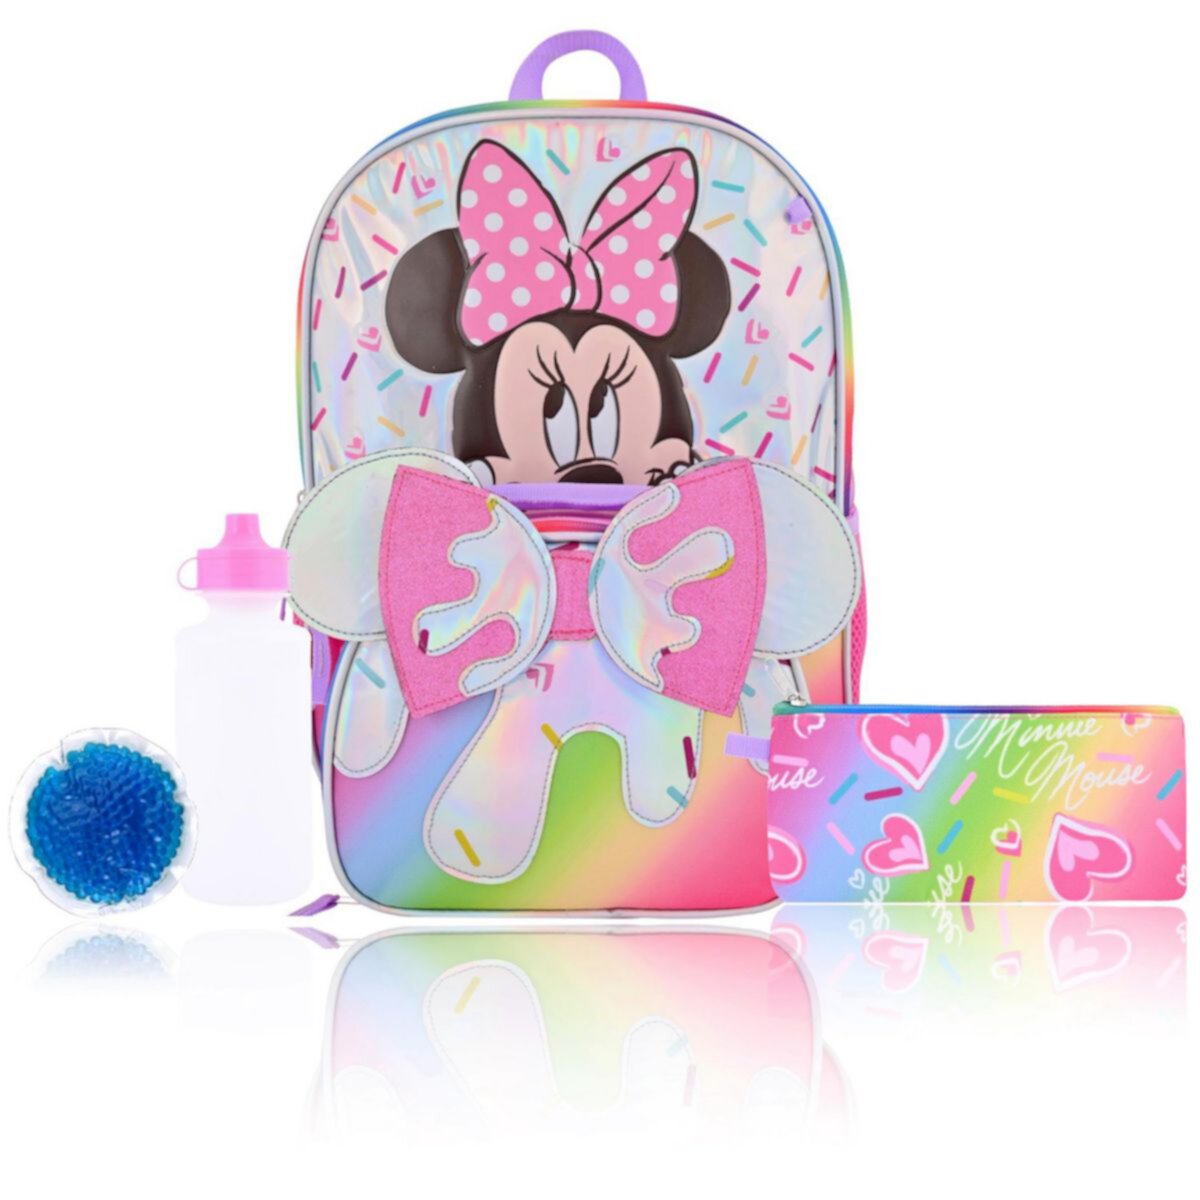 Disney's Minnie Mouse 5-Piece Backpack Set Licensed Character